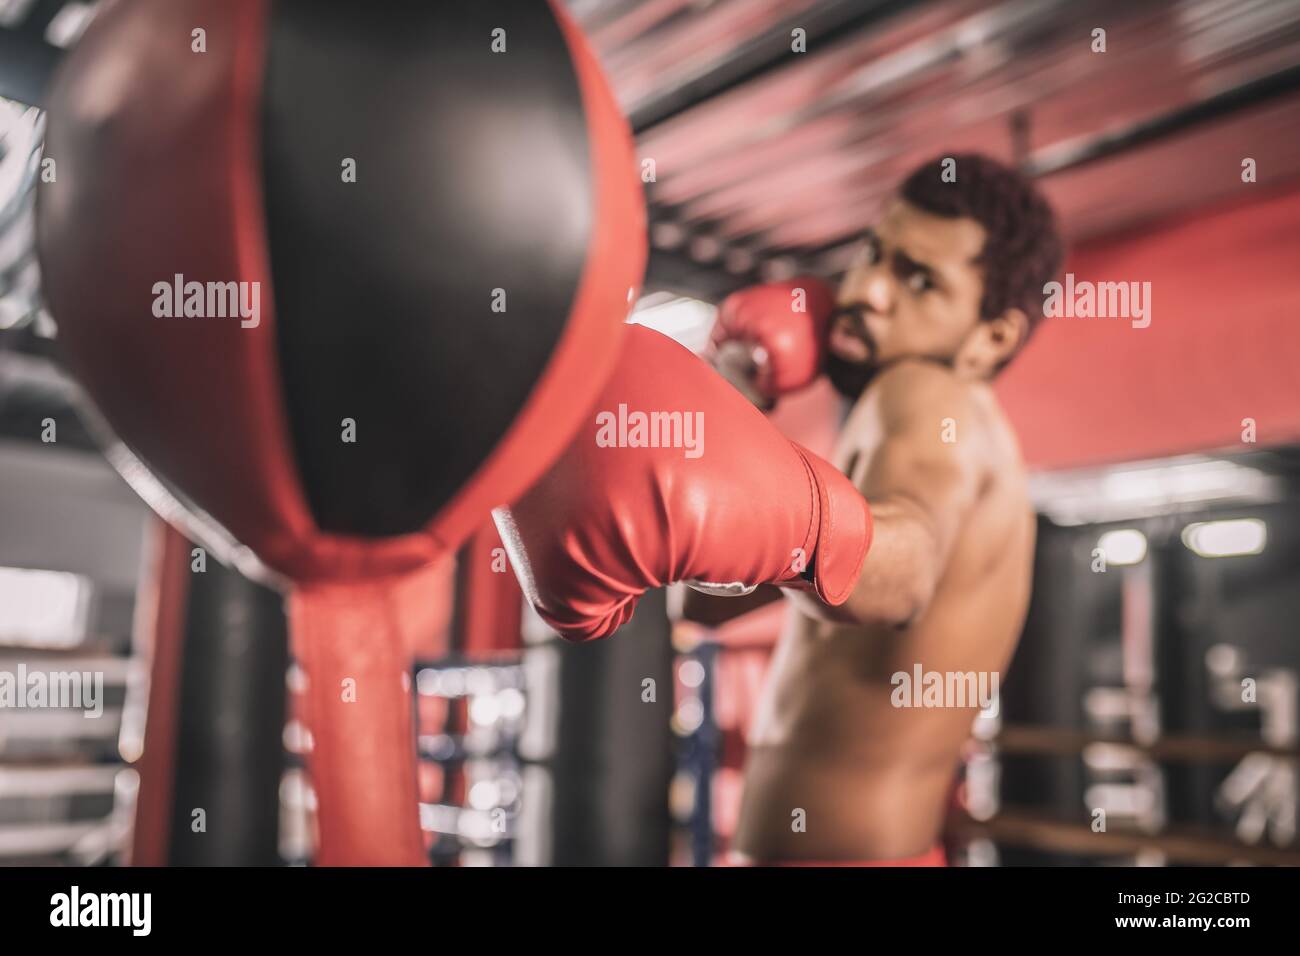 African american kickboxer having a workout in a gym and looking concentrated Stock Photo